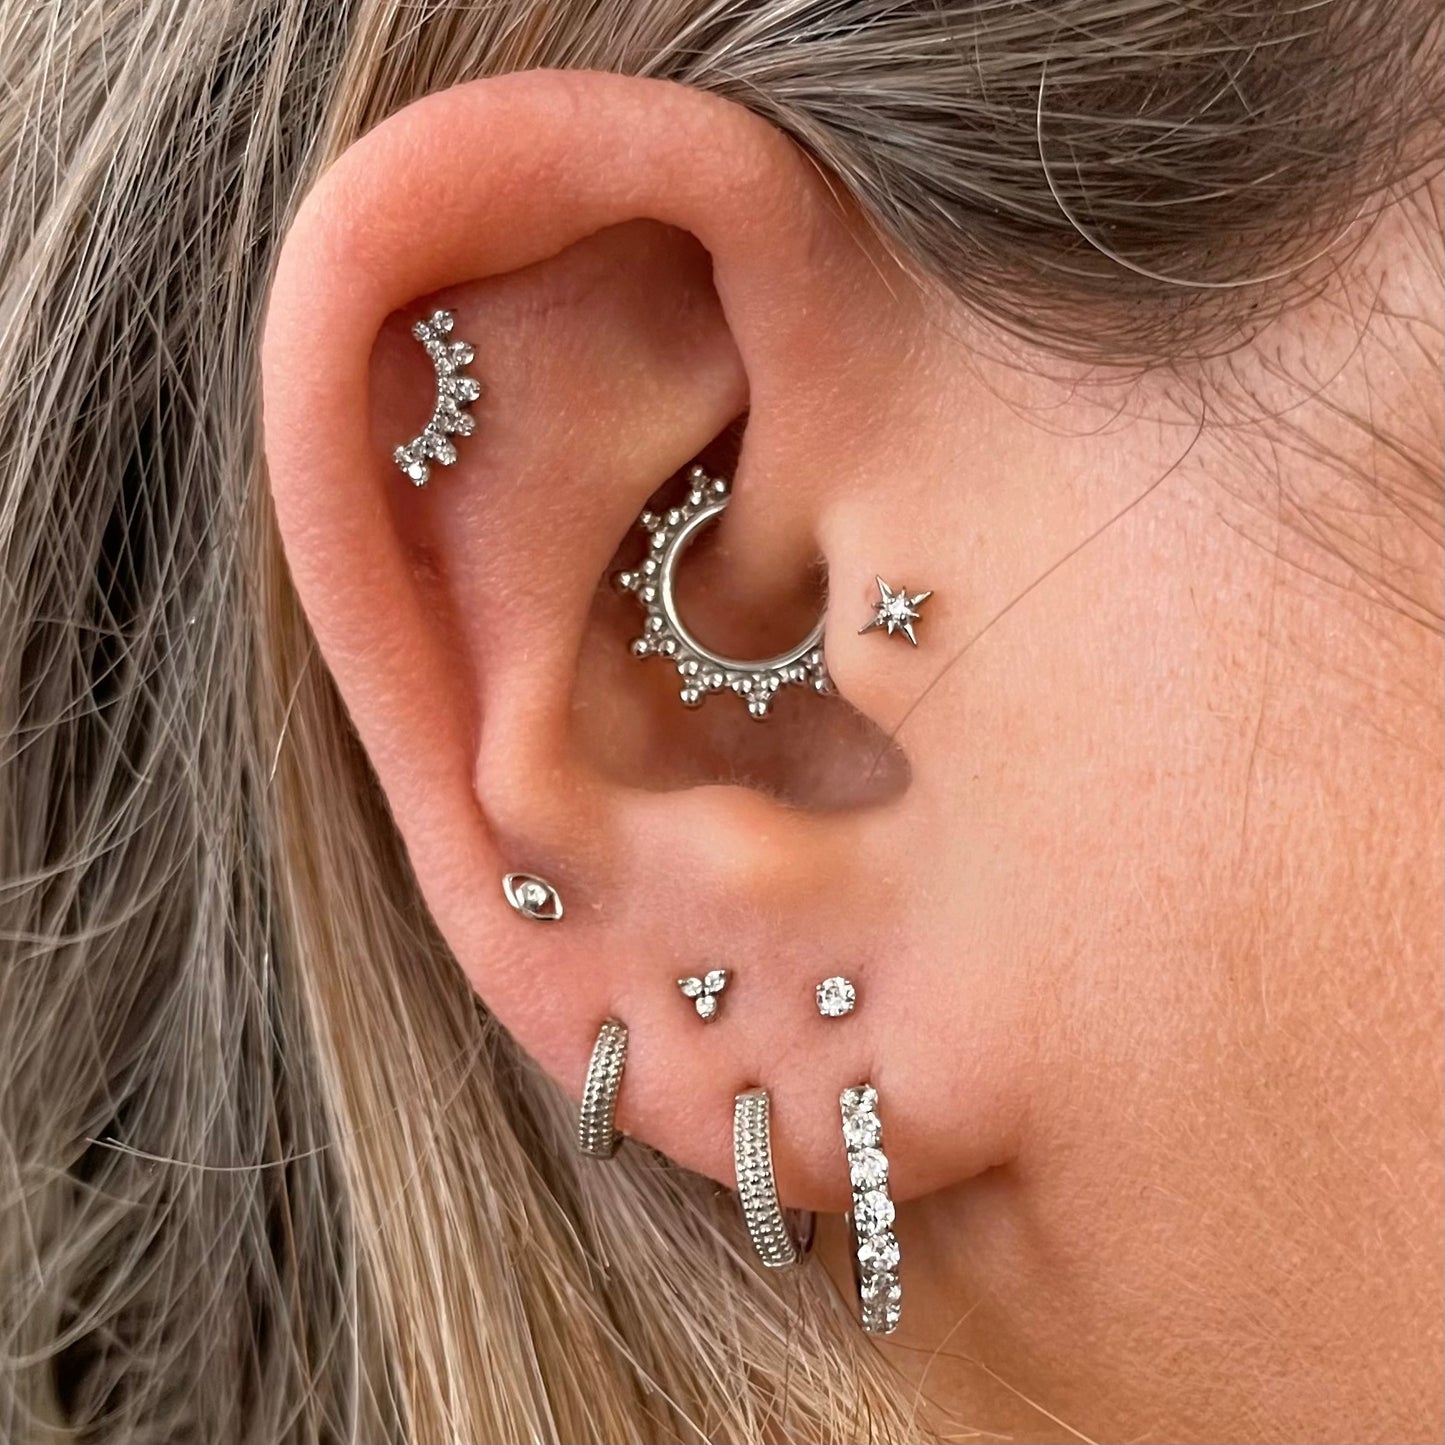 The tiny trio stacking set - 9k solid white gold flat back labret stud earring set